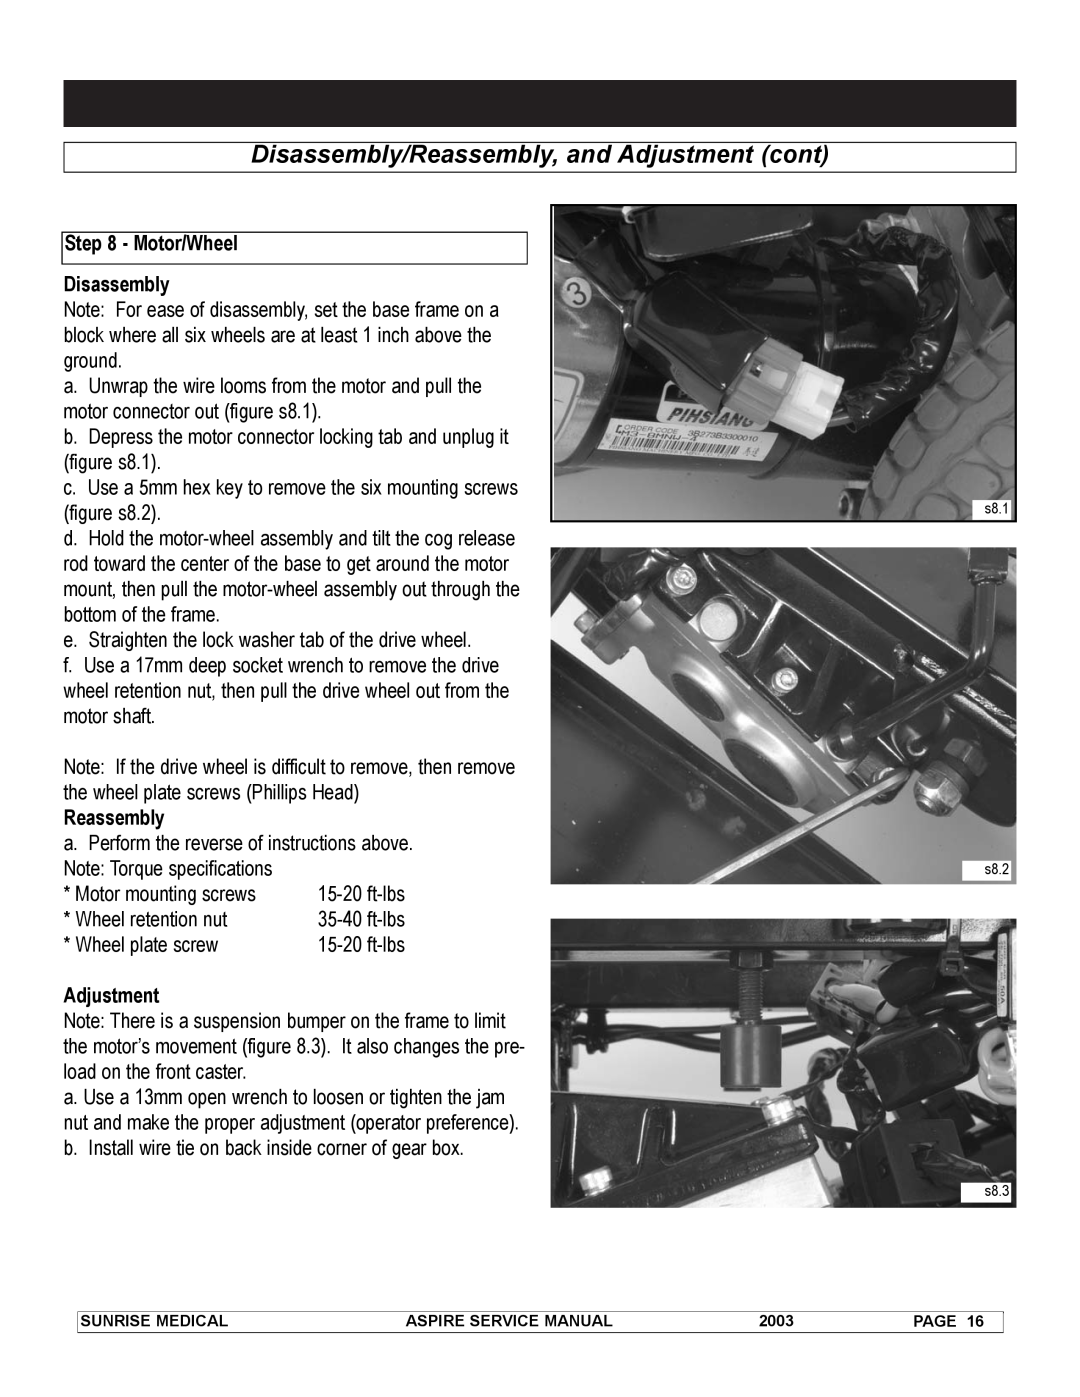 Sunrise Medical 931157 service manual Disassembly/Reassembly, and Adjustment cont, s8.1 s8.2 s8.3 